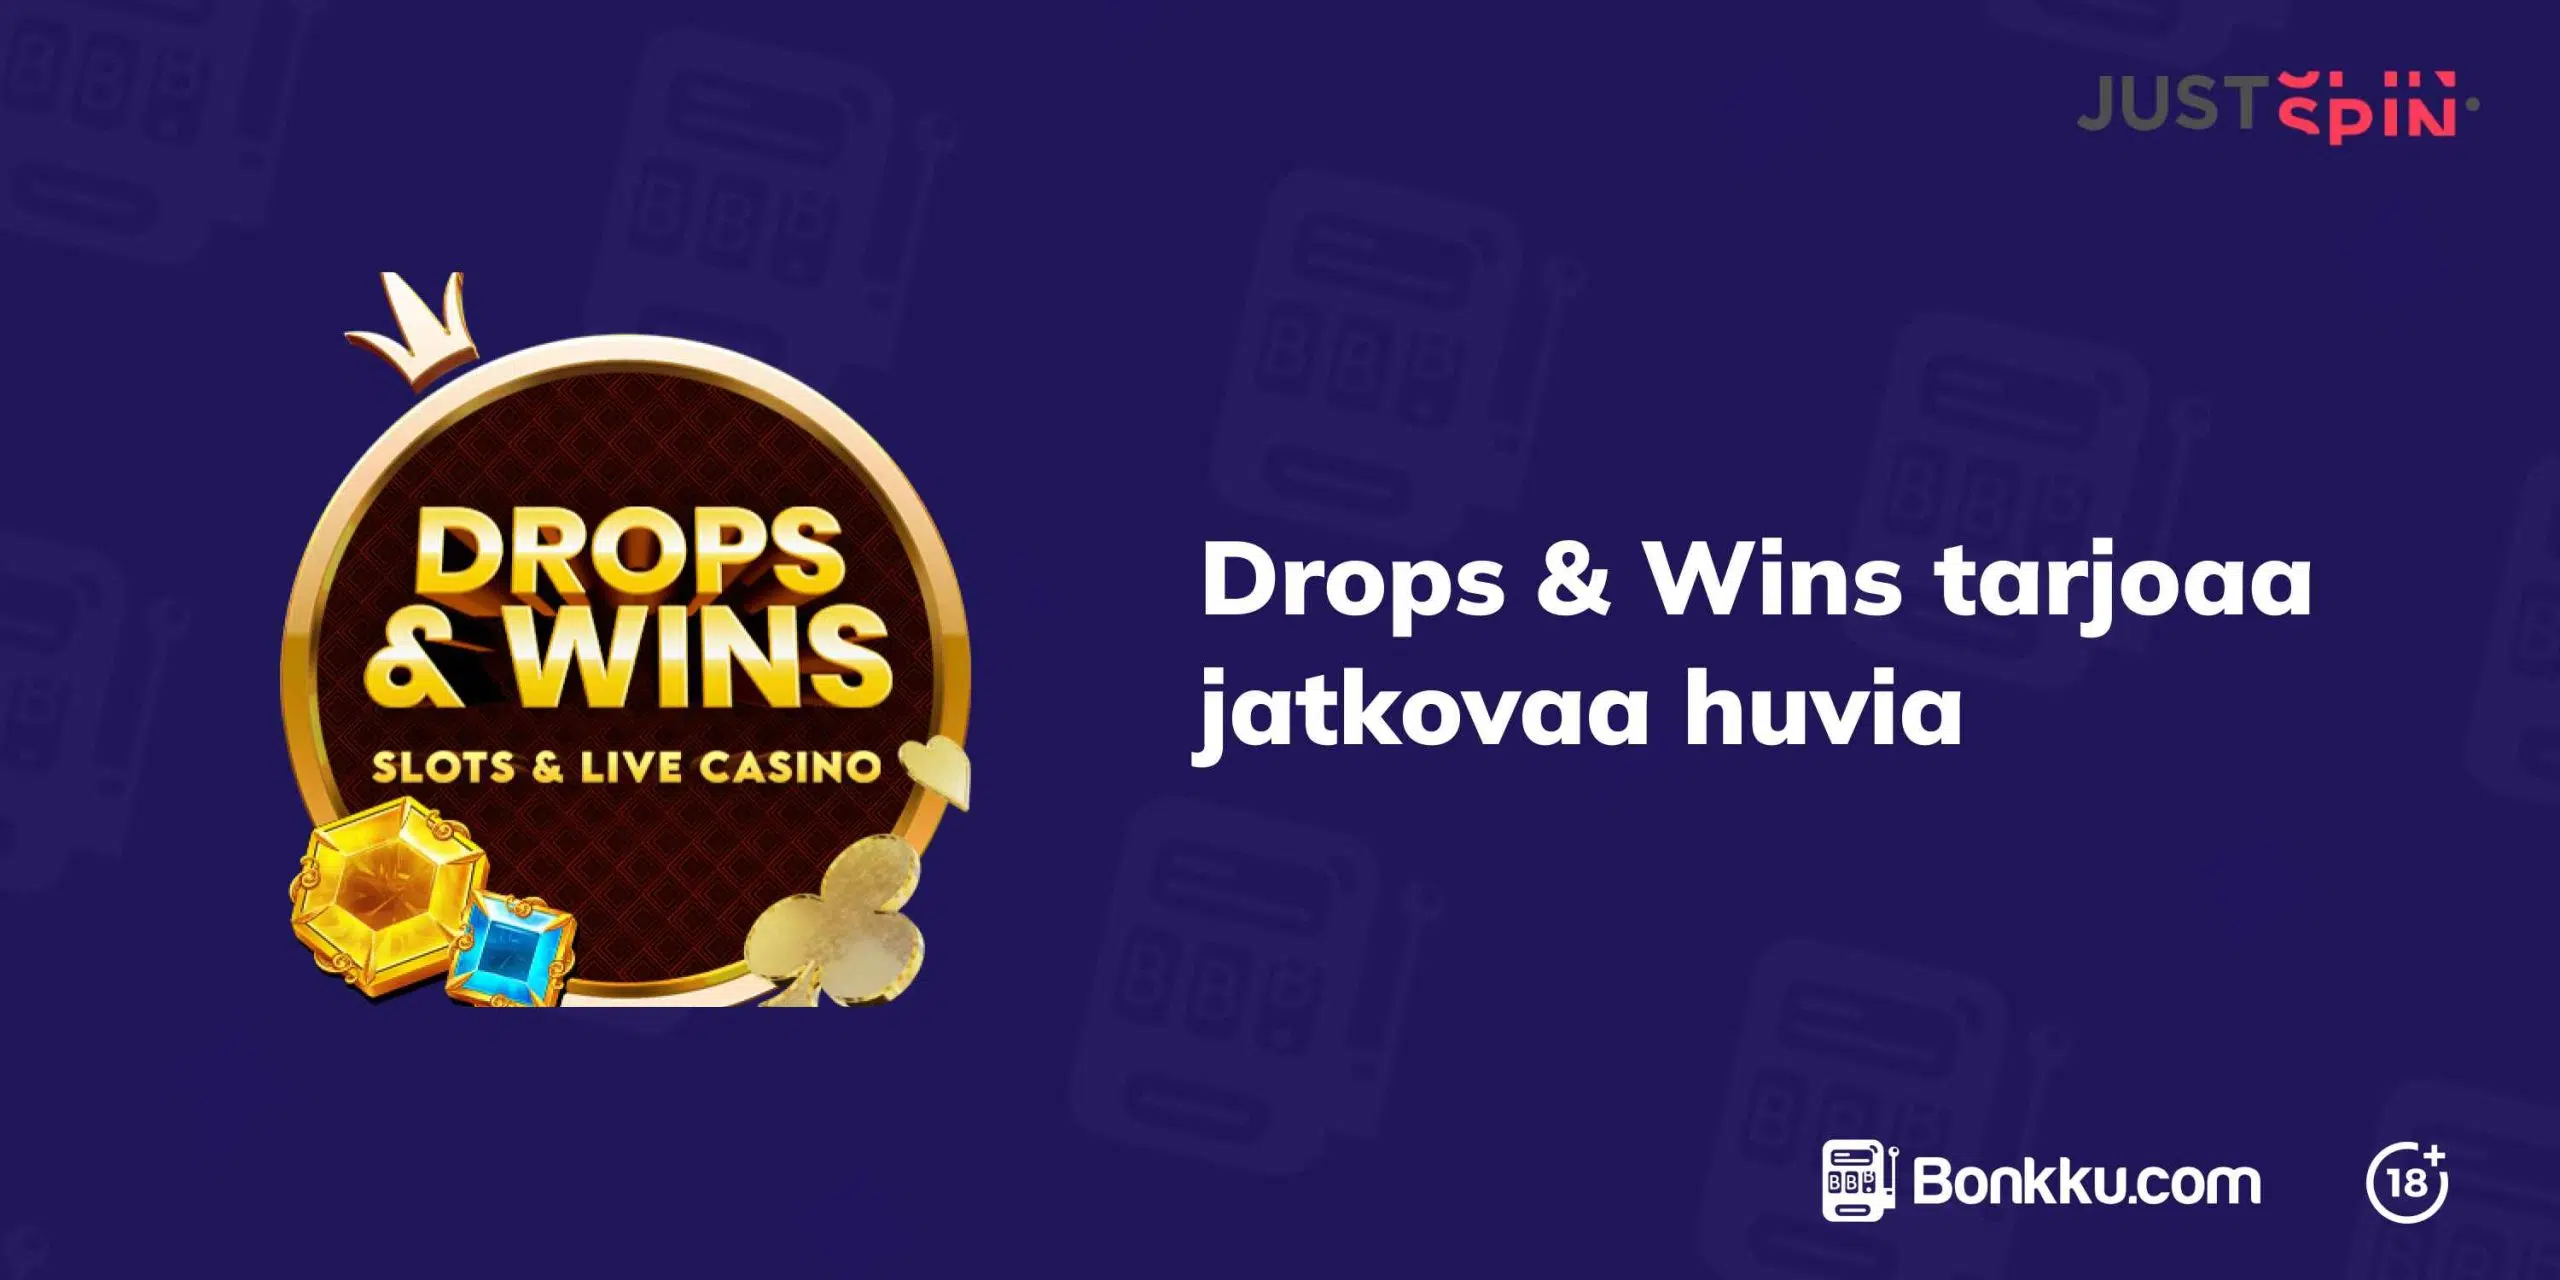 JustSpin Casino Drops and wins